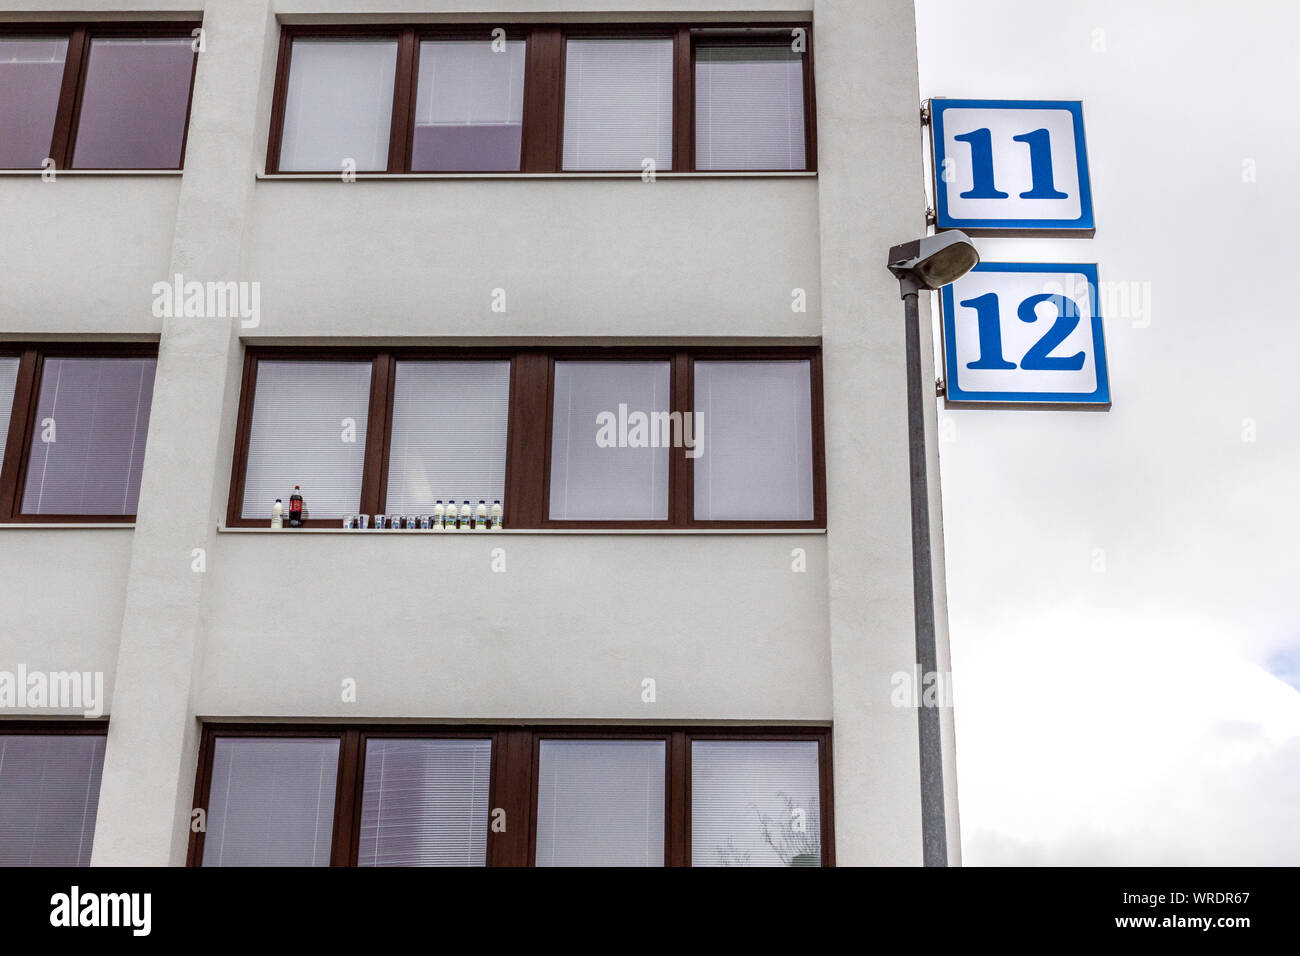 Strahov dormitory - keeping drinks cold outside on the window sill. Student accommodation near the famous Strahov stadium, Prague, Czech Republic Stock Photo